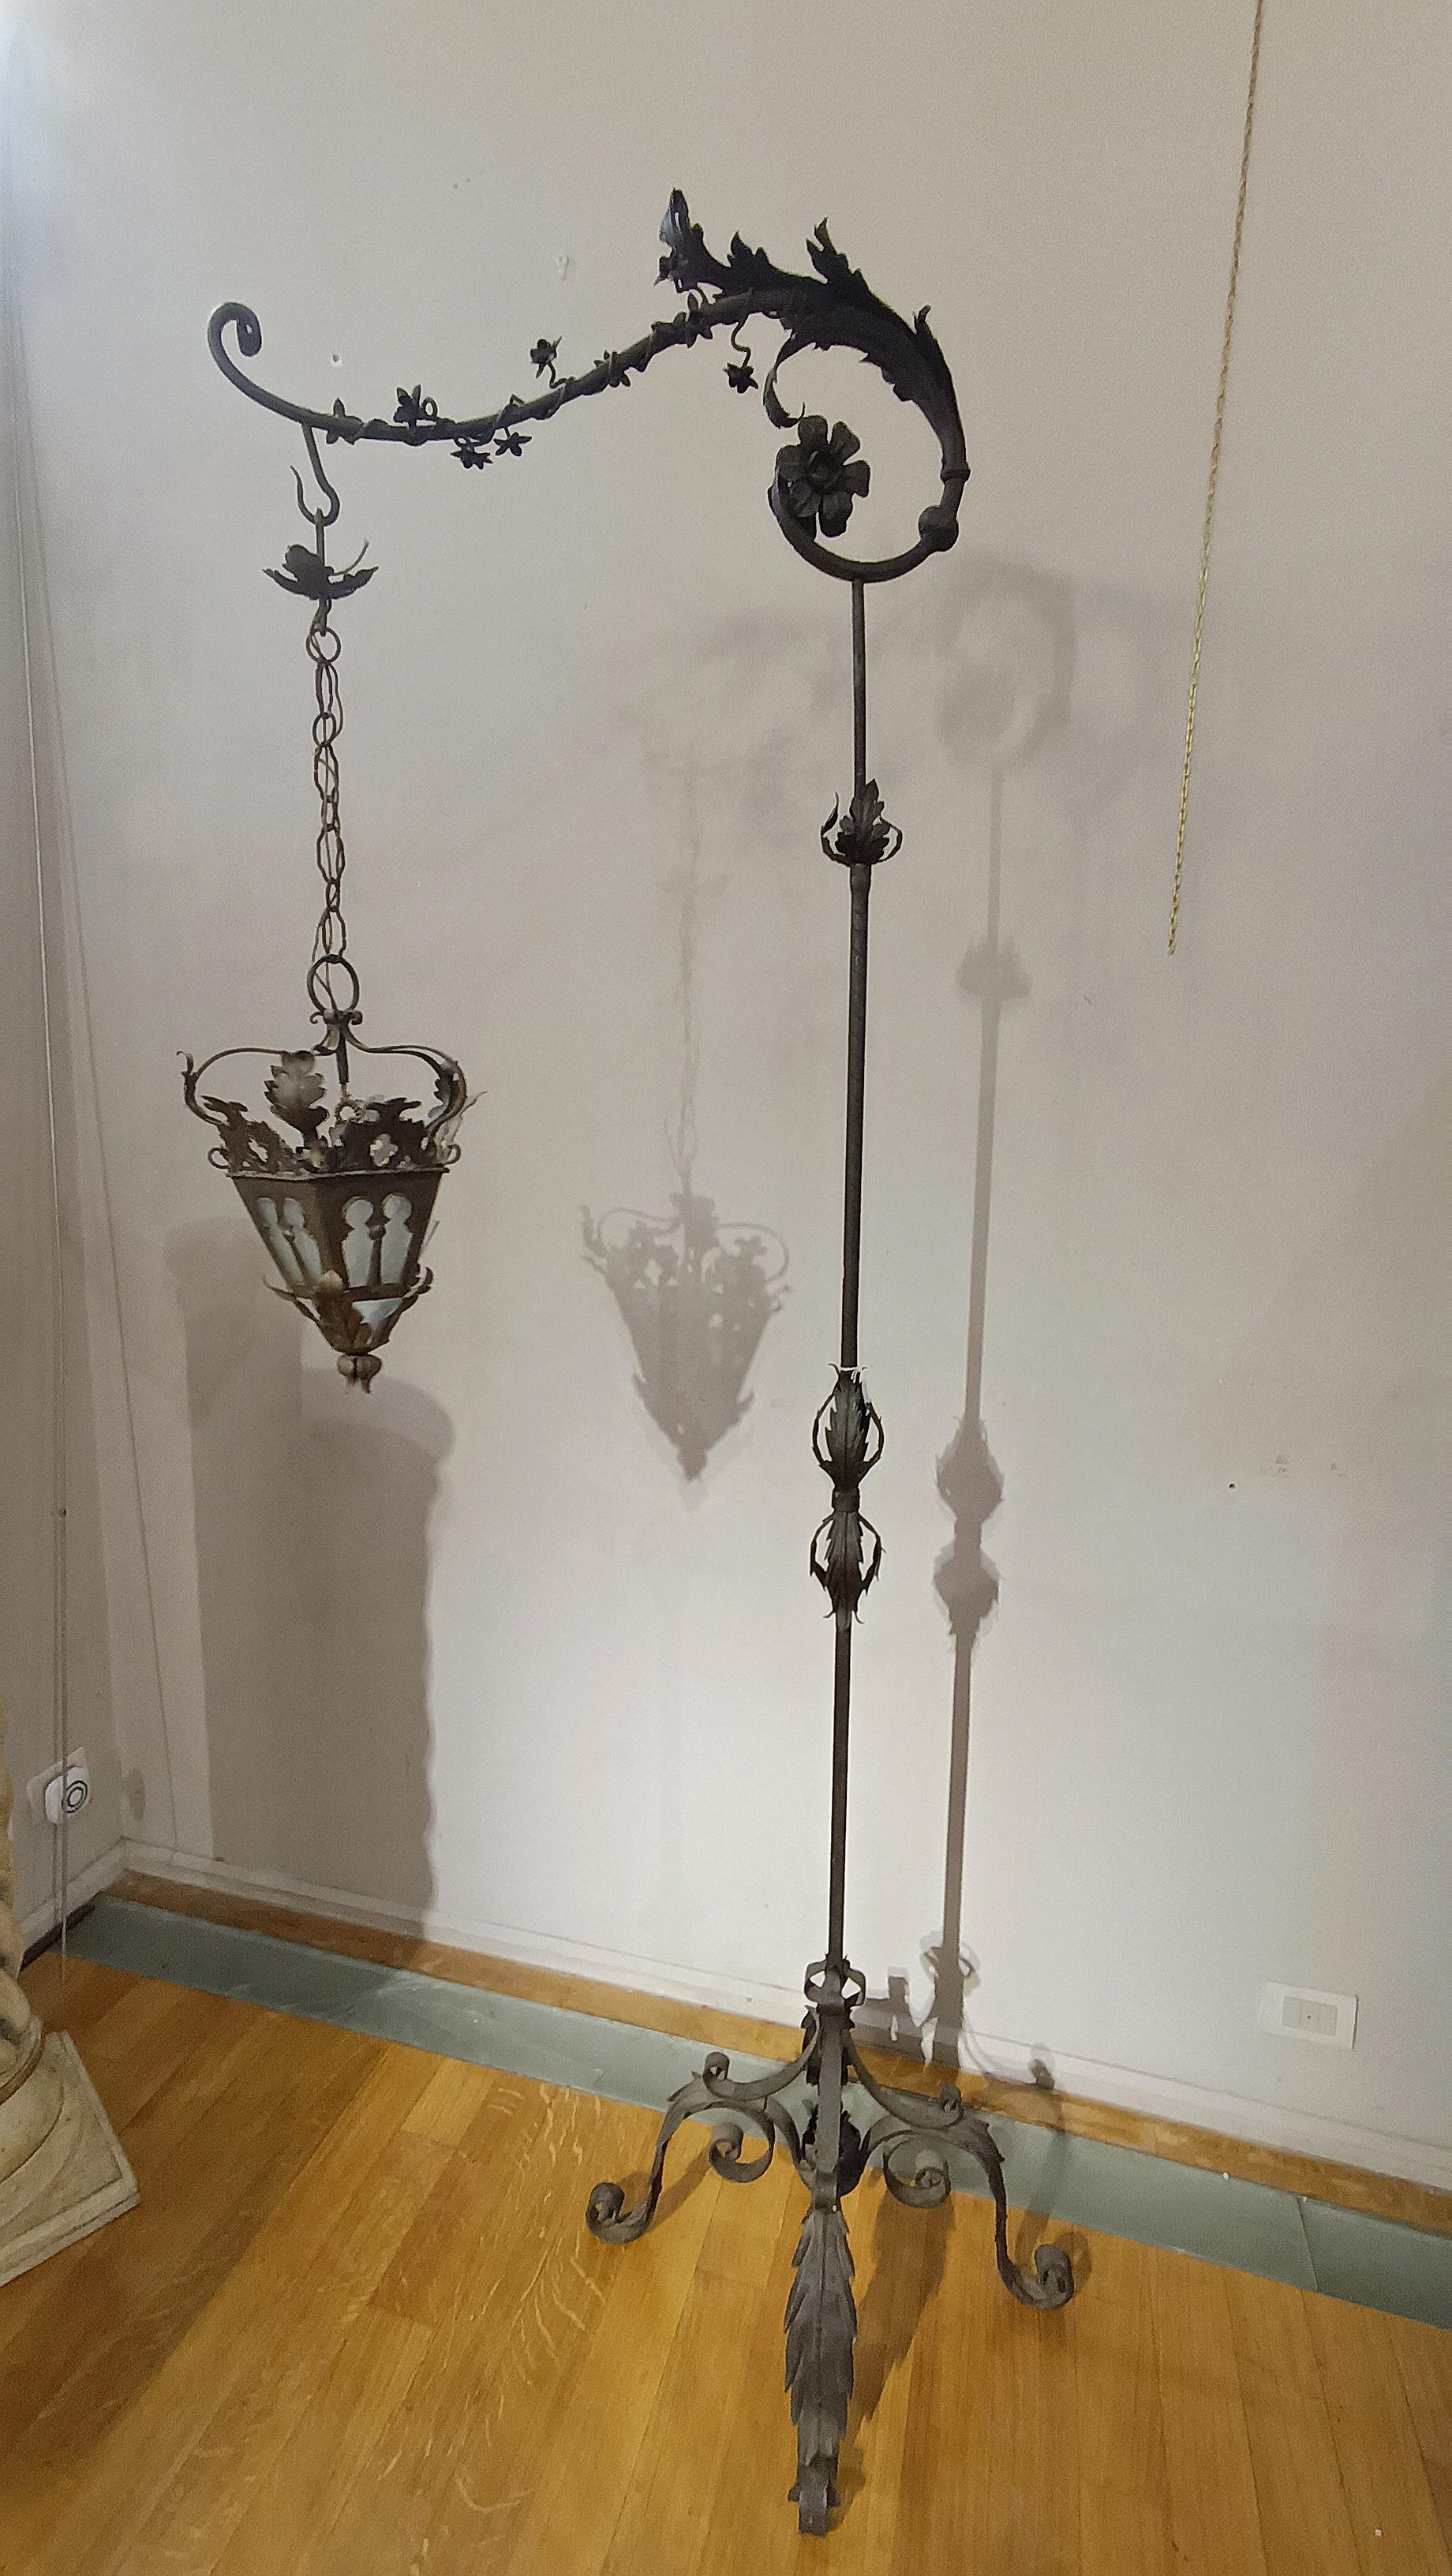 END OF THE 19th CENTURY IRON LANTERN HOLDER For Sale 3